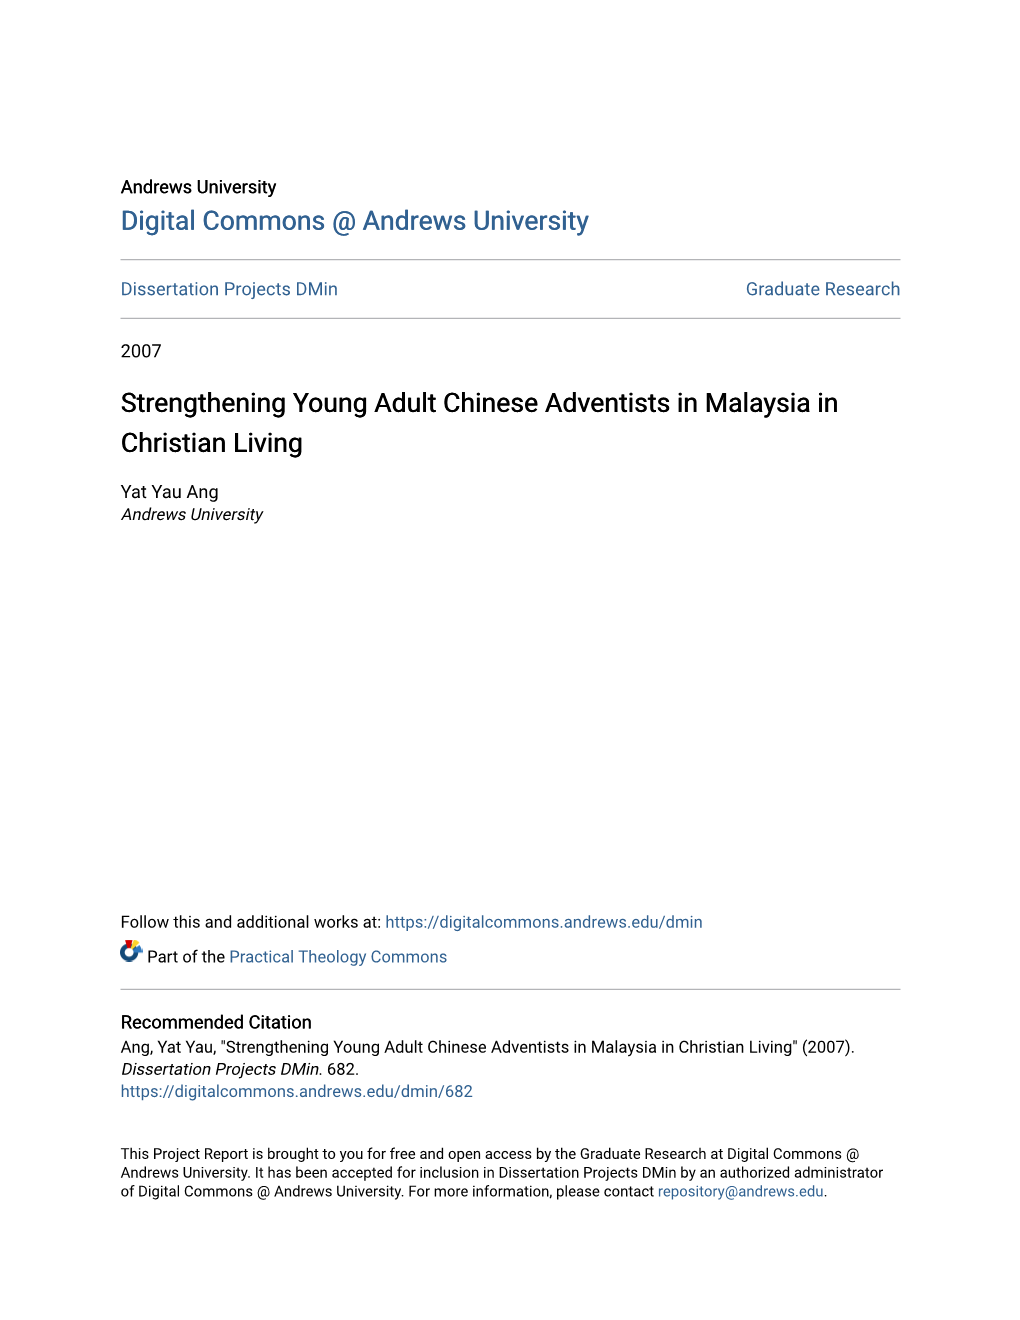 Strengthening Young Adult Chinese Adventists in Malaysia in Christian Living